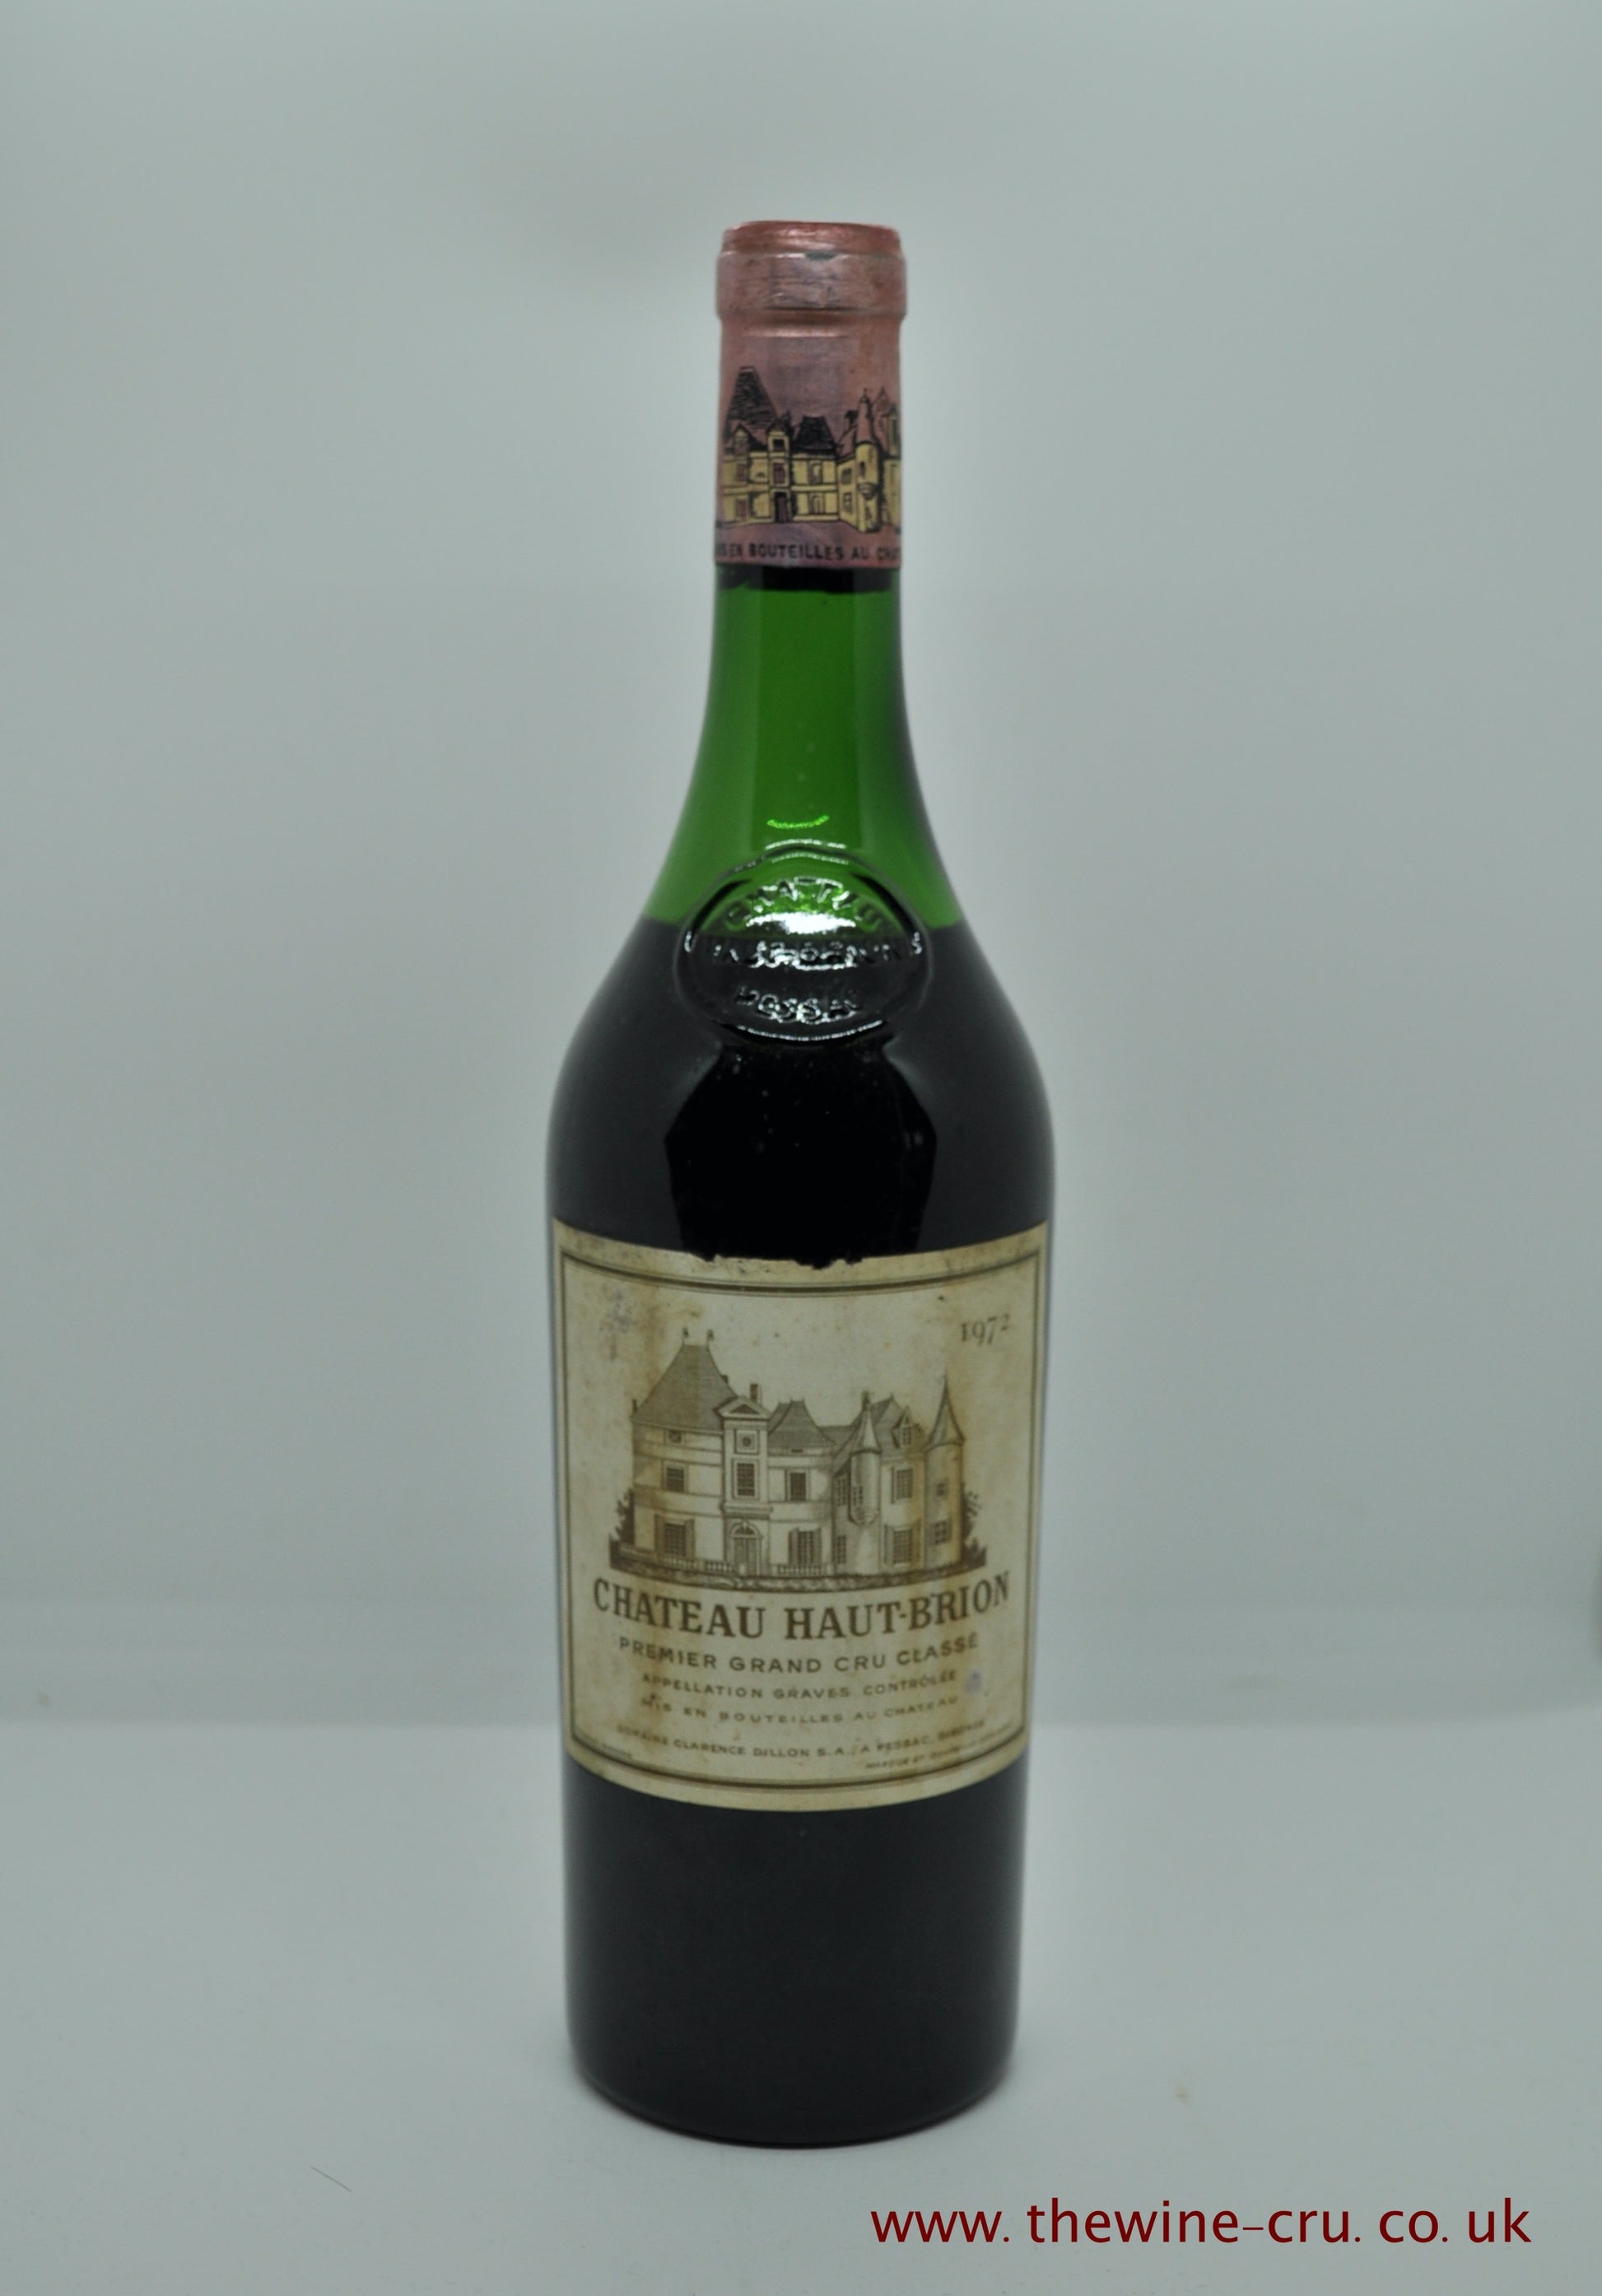 A bottle of 1972 vintage red wine. Chateau Haut Brion 1972. France, Bordeaux. The bottle is in good condition with the level being half way up the emblem. Immediate delivery. Free local delivery. Gift wrapping available.